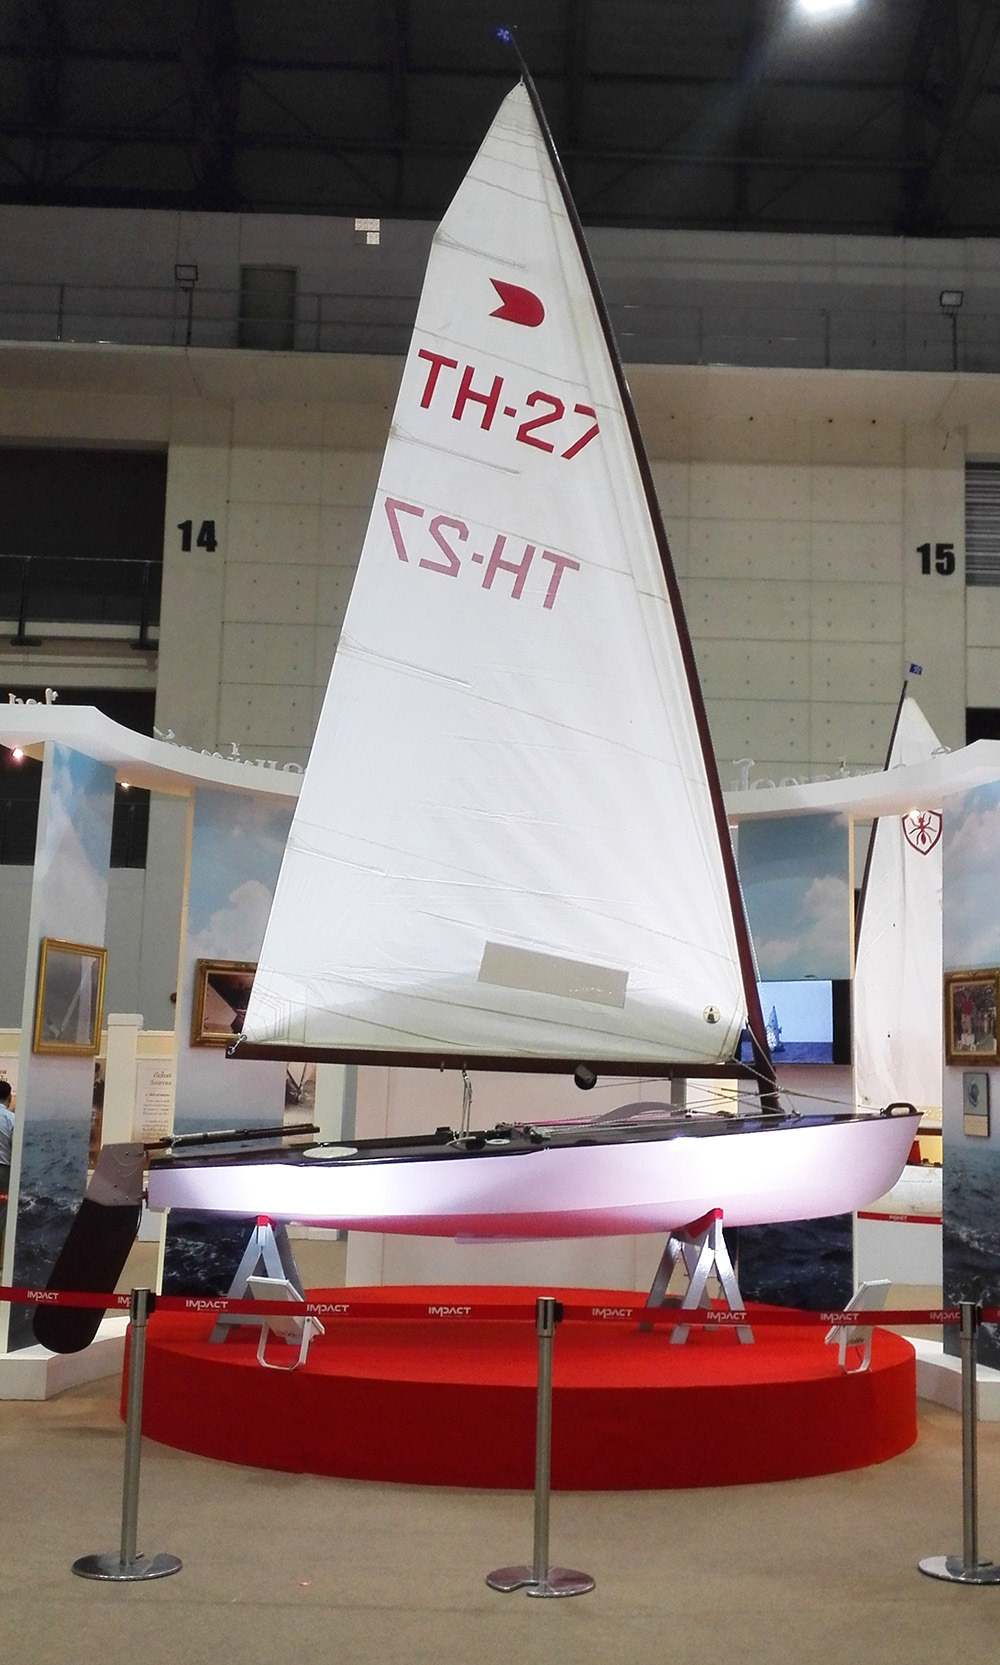 OK Dinghy “Vega 2”, built by His Majesty the late King Bhumipol Adulyadej of Thailand 50 years ago. Here on display at the 2016 National Science and Technology Fair in Bangkok at IMPACT Muang Thani.